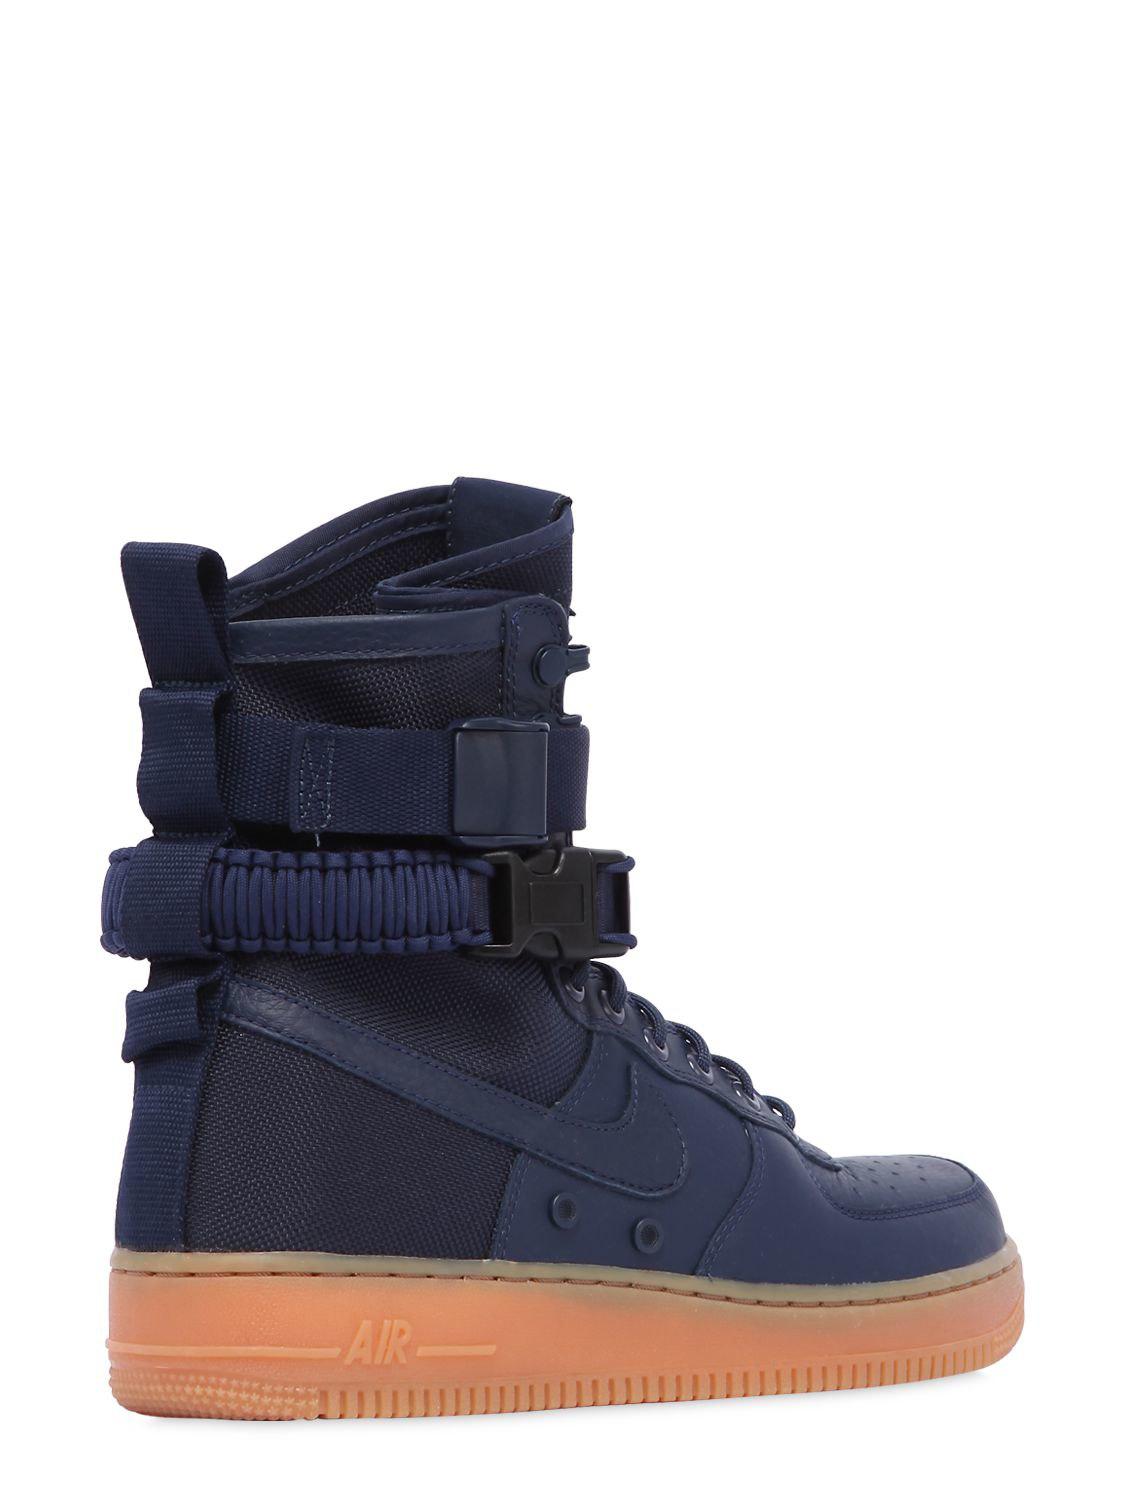 Nike Leather Sf Air Force 1 High Top Sneakers in Blue - Lyst